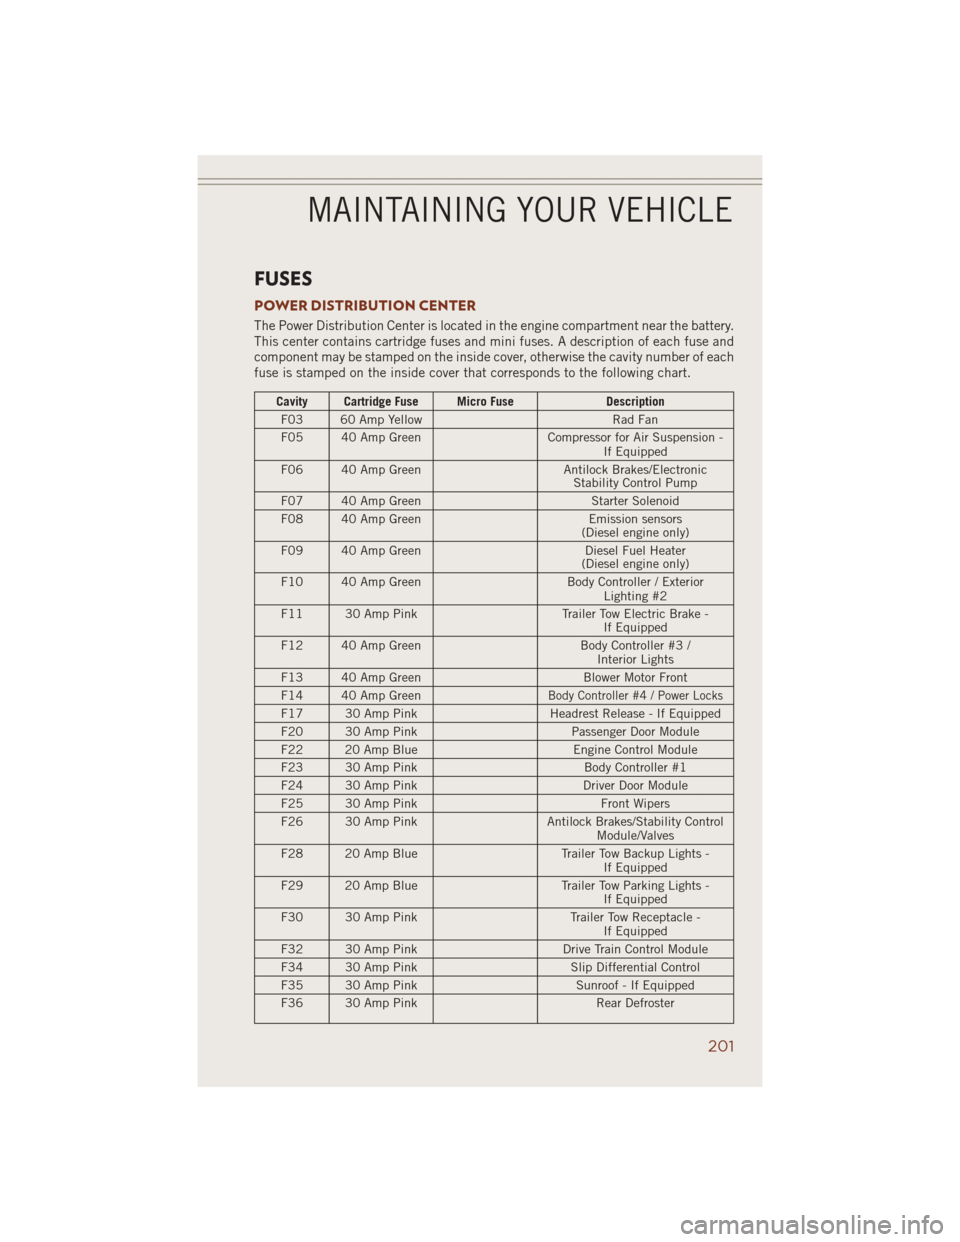 JEEP GRAND CHEROKEE 2014 WK2 / 4.G User Guide FUSES
POWER DISTRIBUTION CENTER
The Power Distribution Center is located in the engine compartment near the battery.
This center contains cartridge fuses and mini fuses. A description of each fuse and